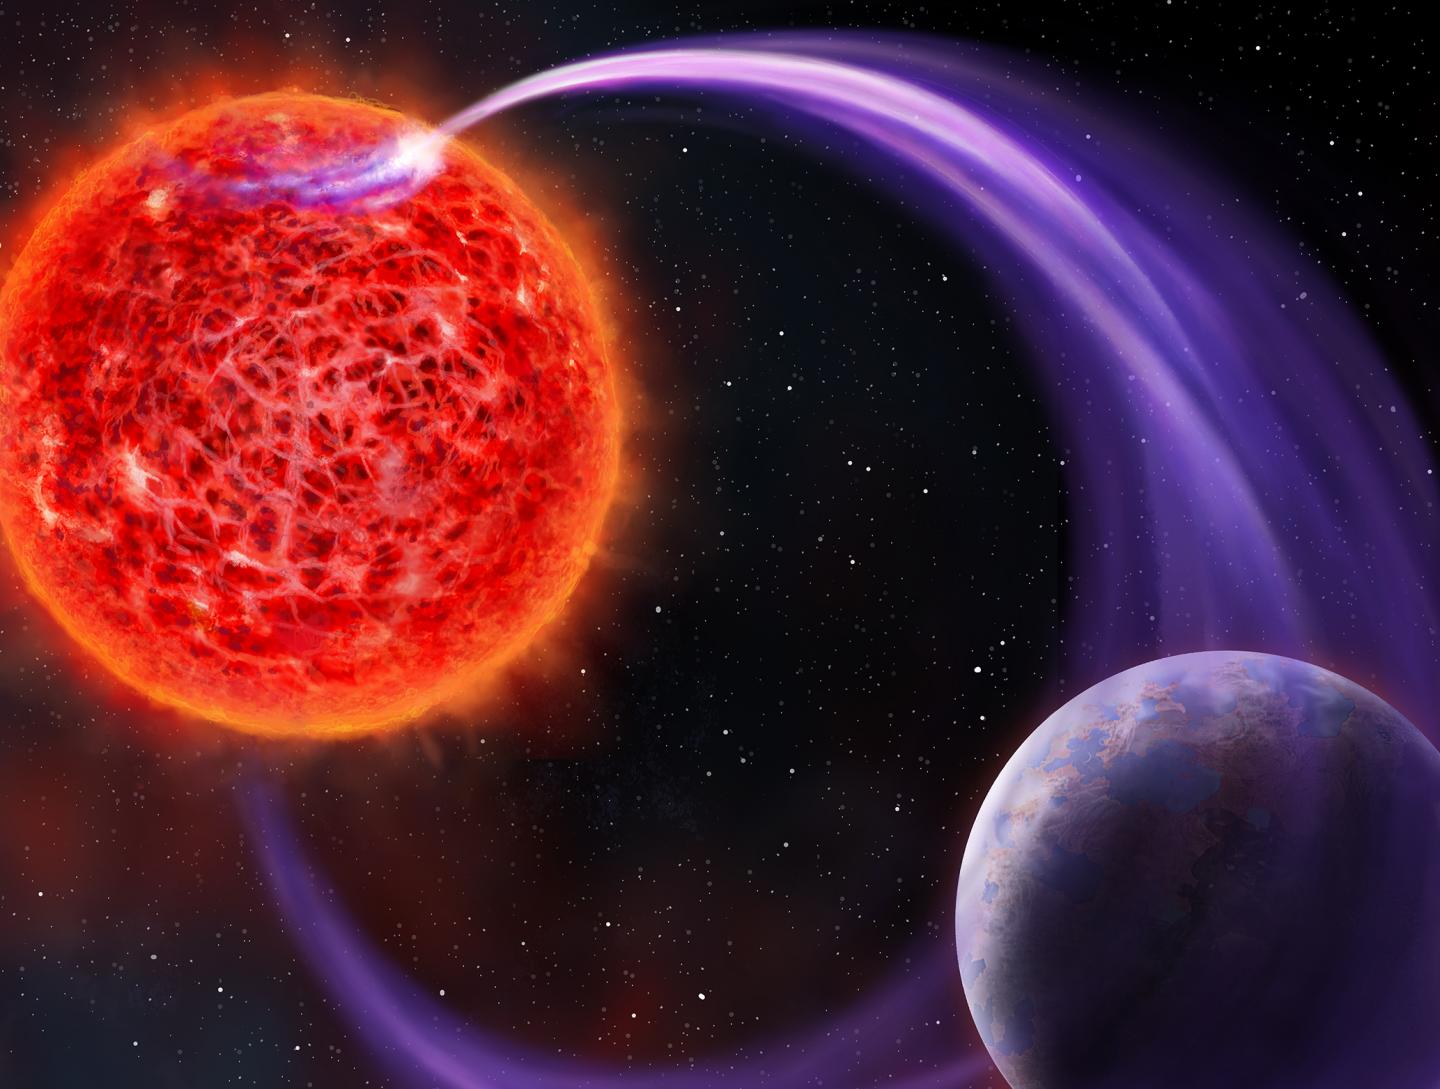 Red Dwarf Star's Magnetic Interaction with Its Exoplanet